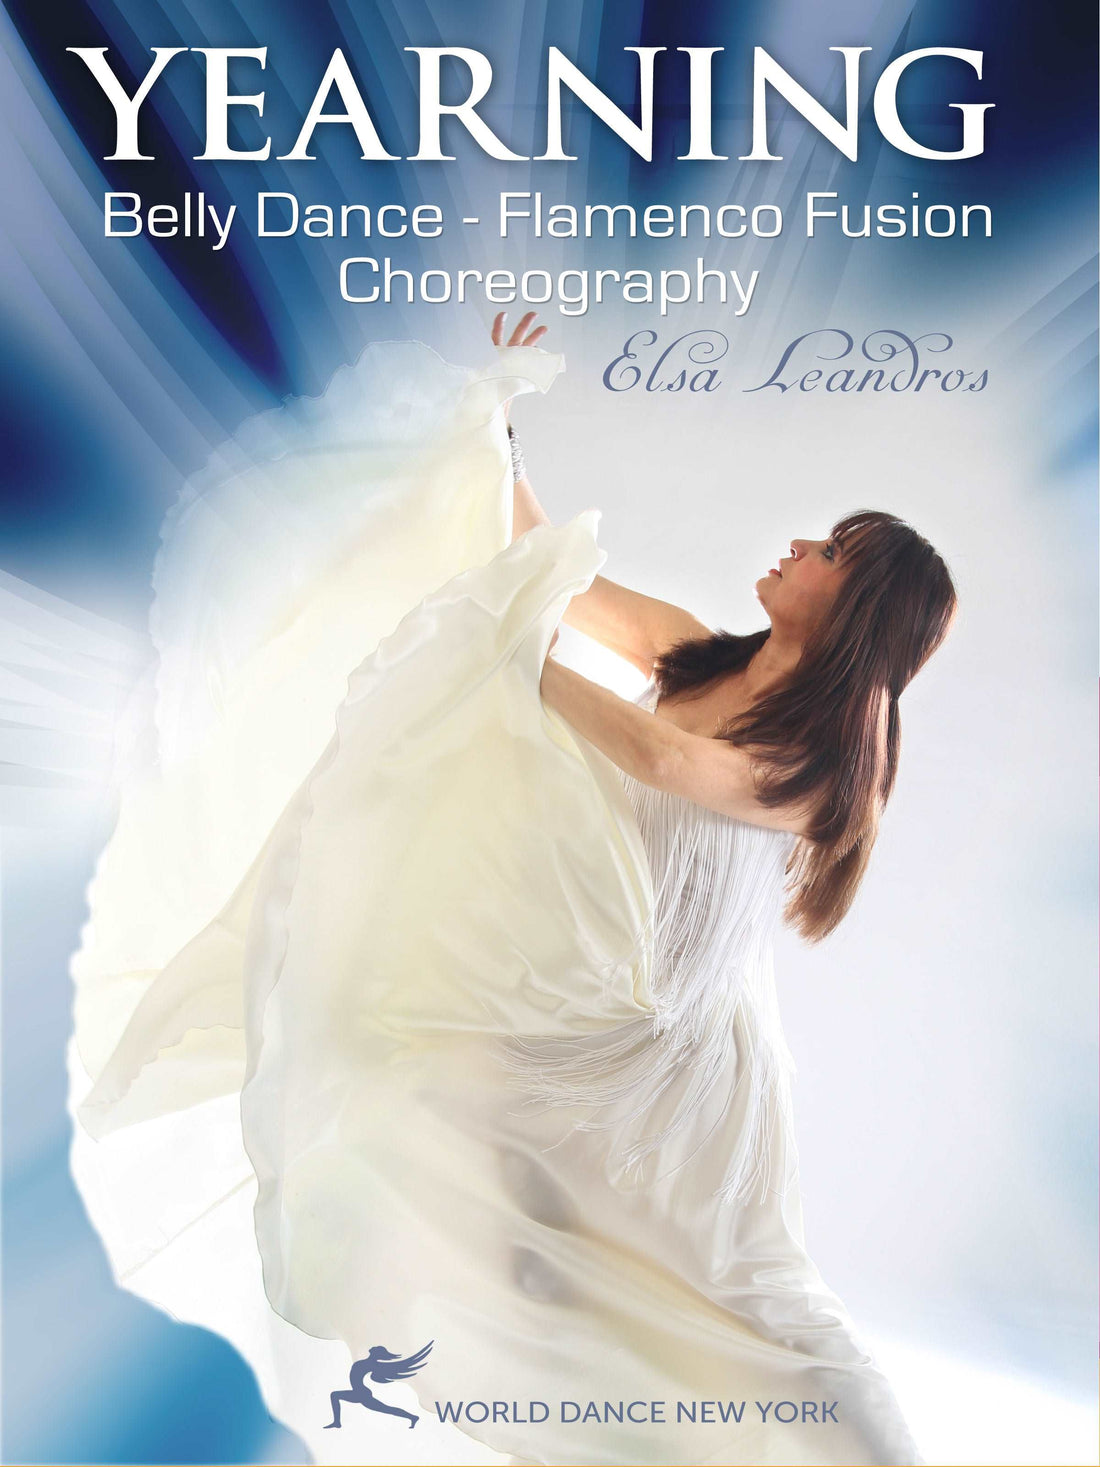 Yearning: Belly Dance / Flamenco Fusion Choreography by Elsa Leandros - World Dance New York